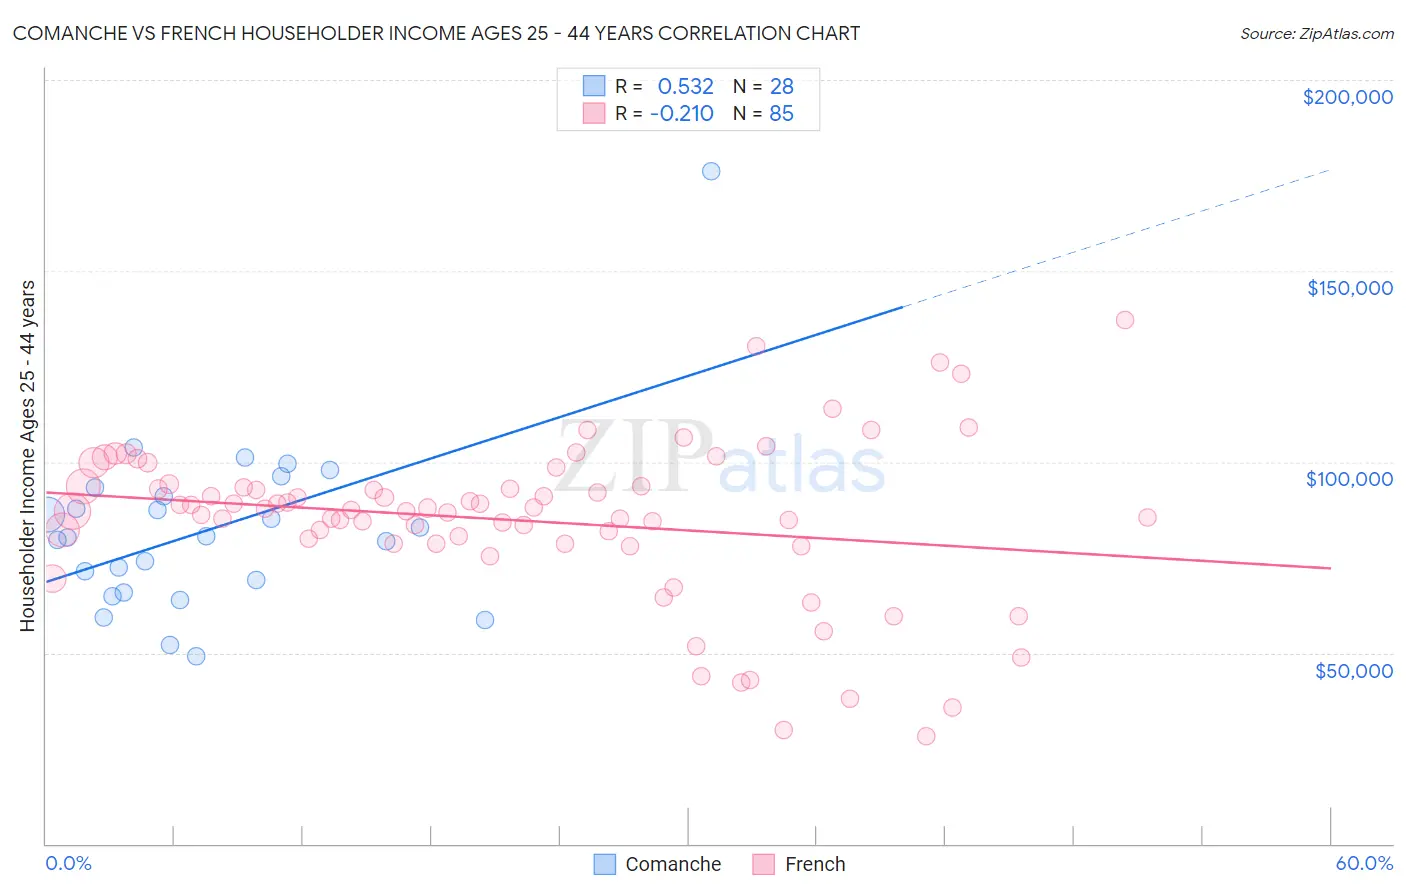 Comanche vs French Householder Income Ages 25 - 44 years